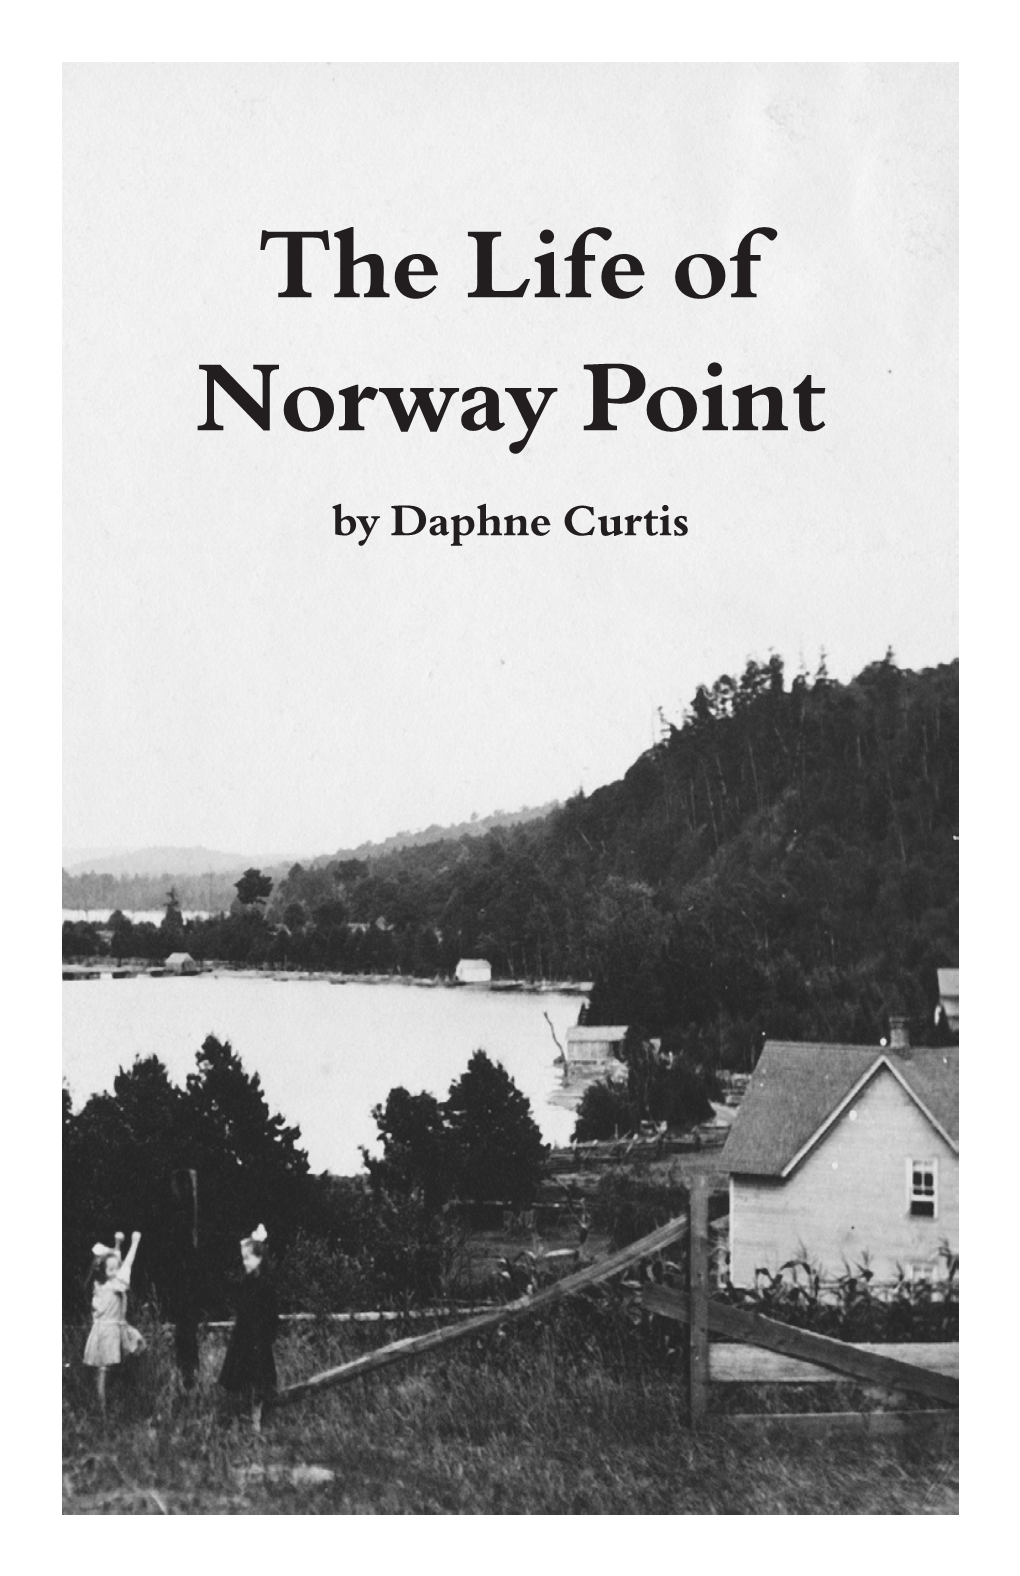 The Life of Norway Point